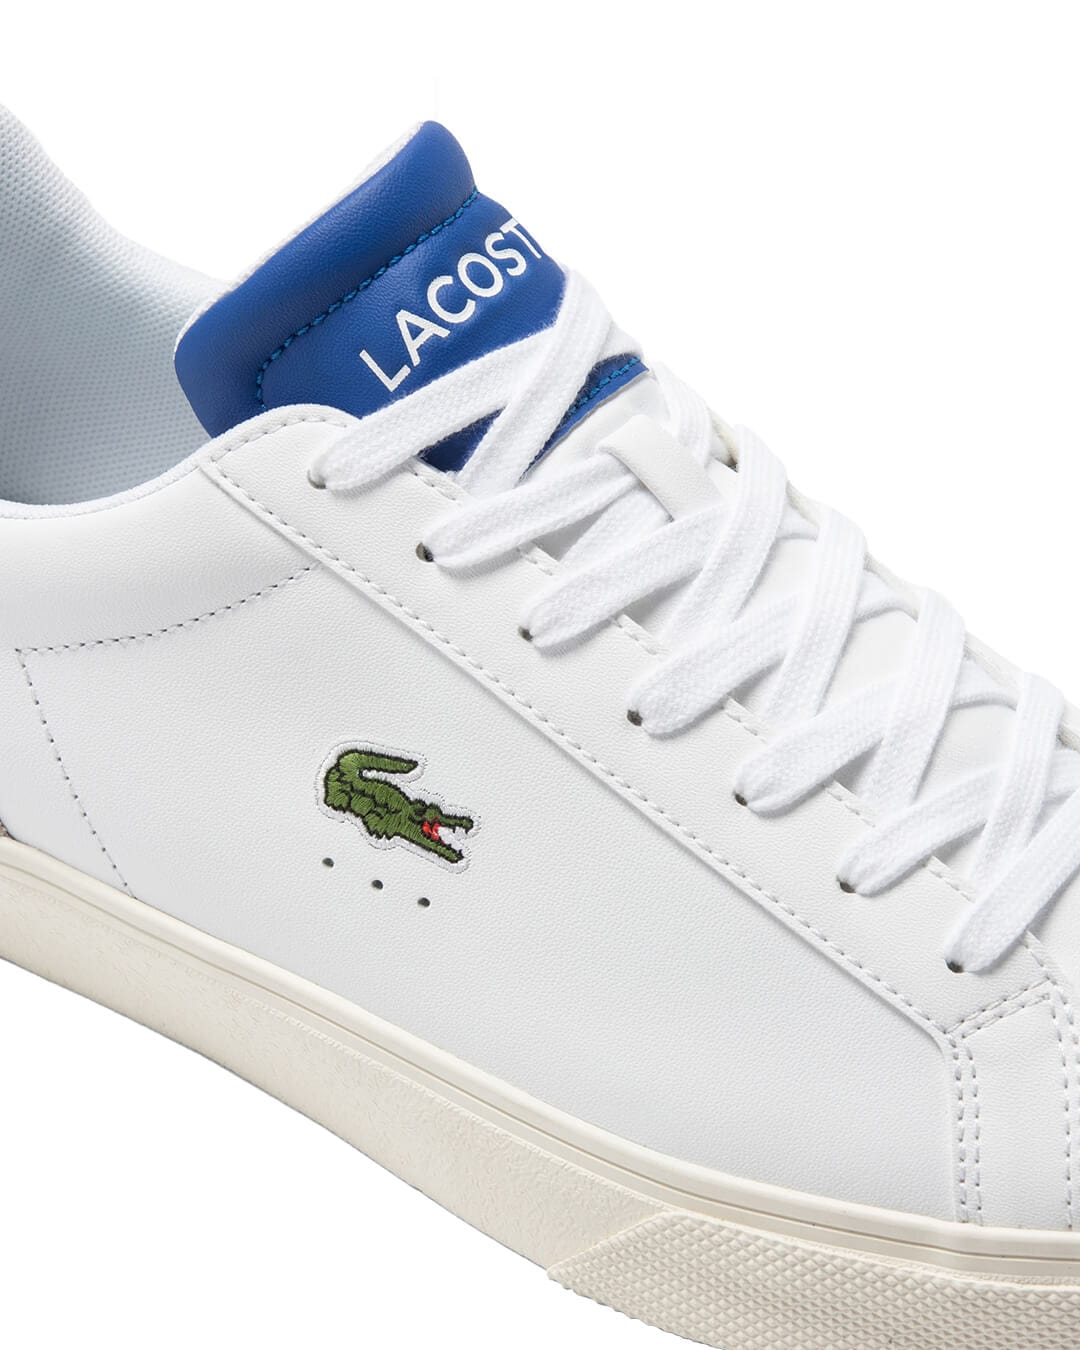 Lacoste Shoes Lacoste Lerond Leather Heel Pop White Sneakers